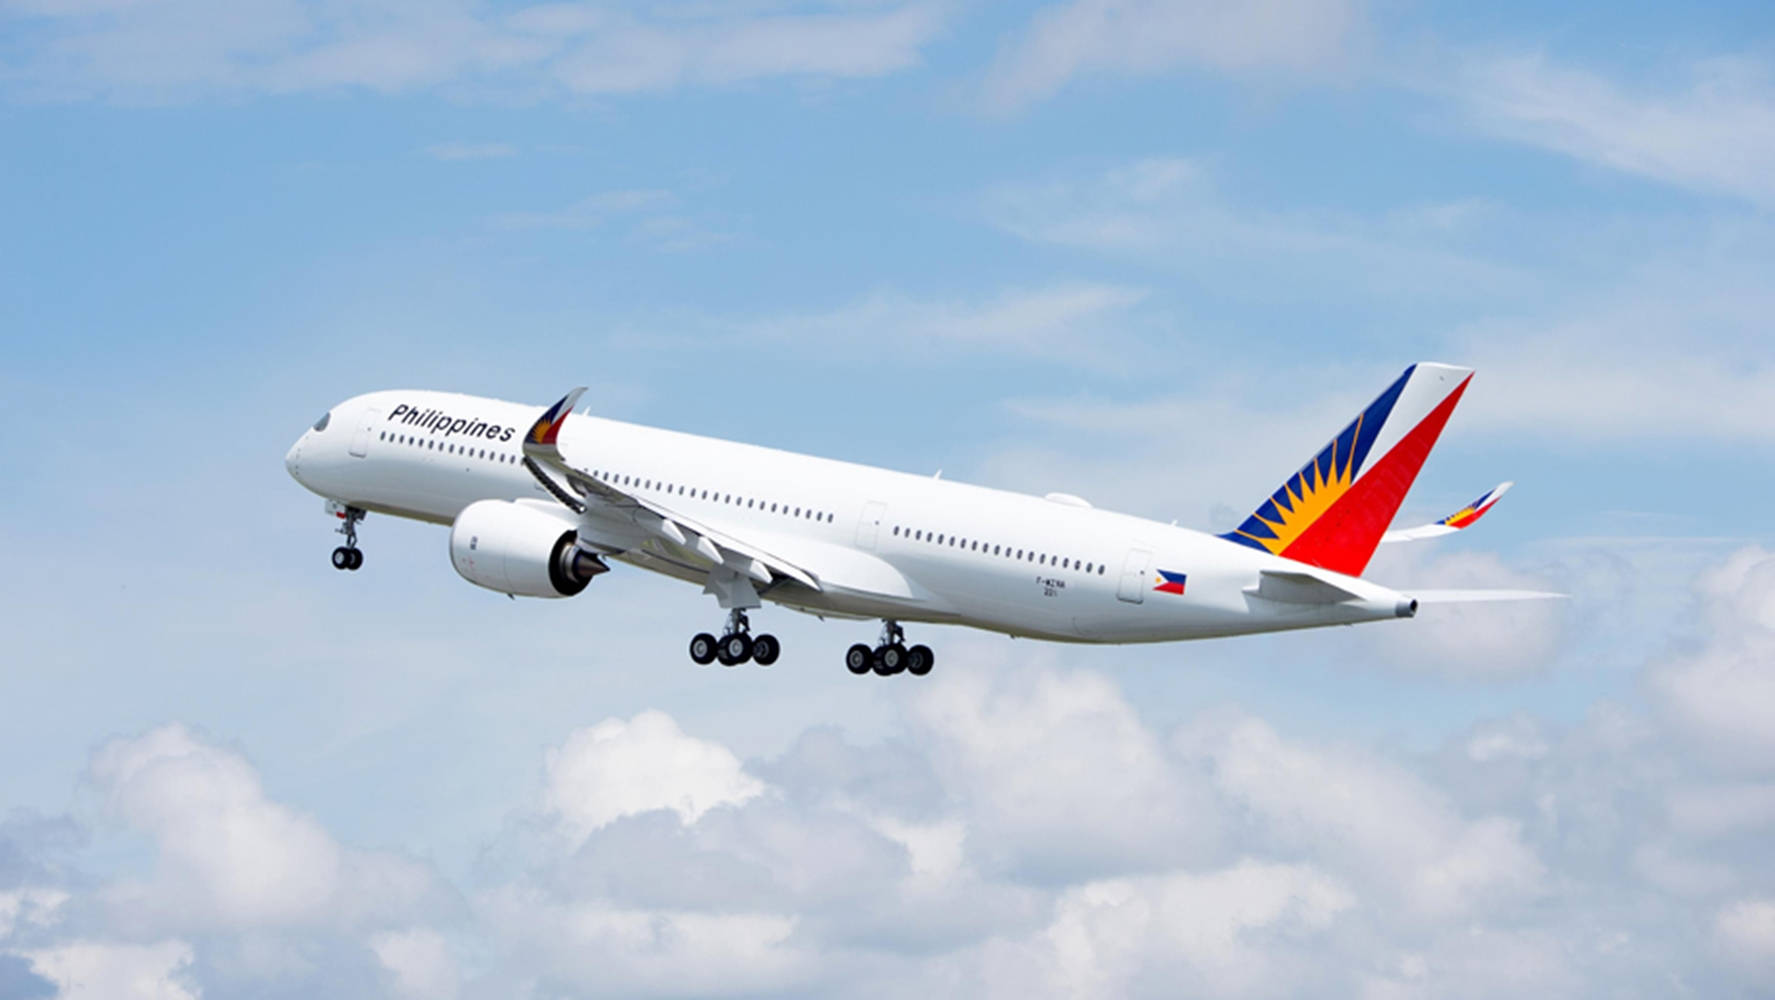 Philippine Airlines Airplane In Cloudy Bright Skies Wallpaper